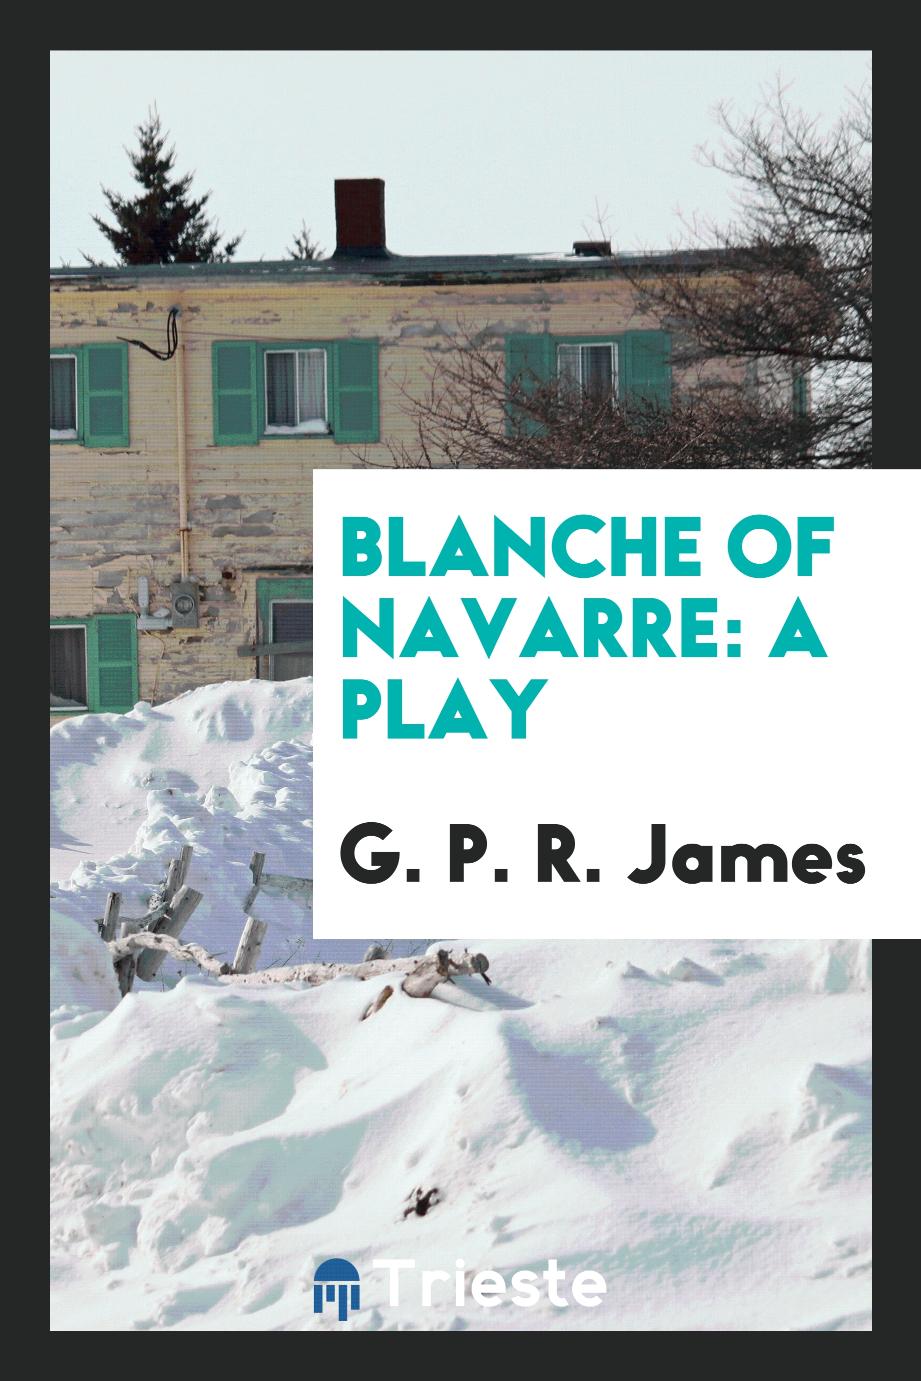 Blanche of Navarre: A Play